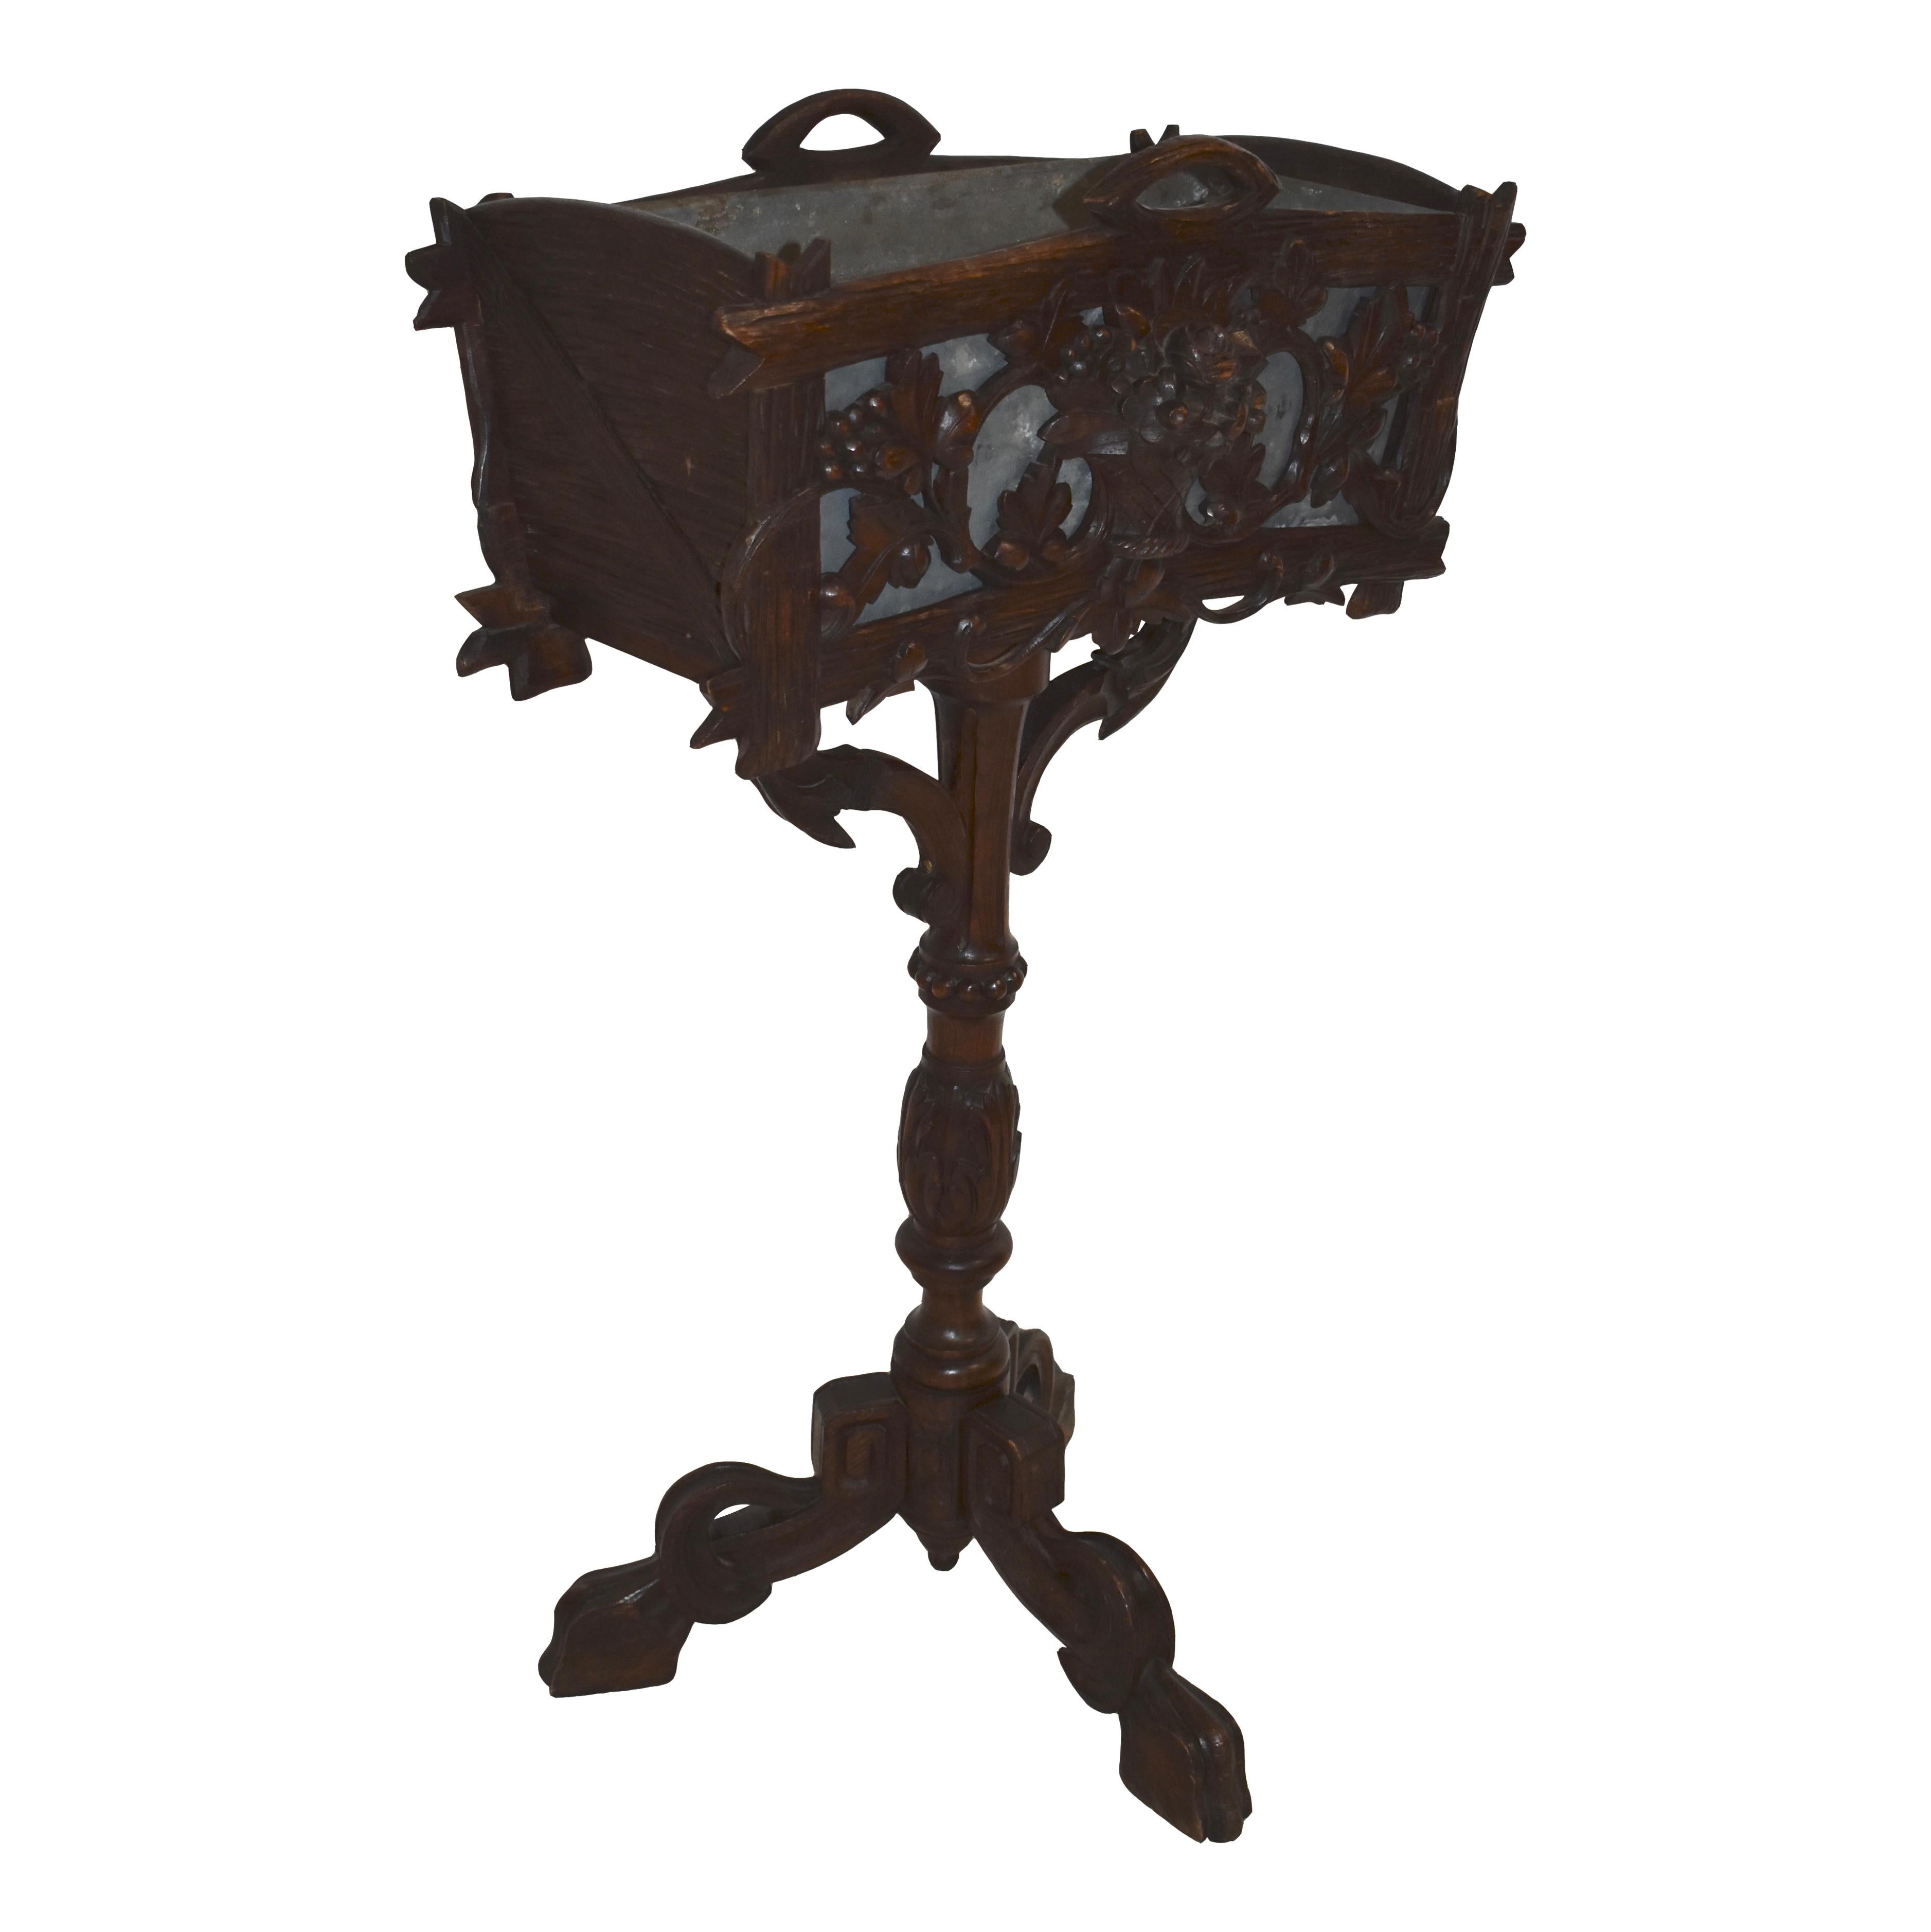 Graceful and elegant, this beautiful wooden planter box features a pierced front carving of a floral basket flanked by scrolled grape vines. The back and sides of the box are carved to look like rough wooden boards. Raised on a turned and carved